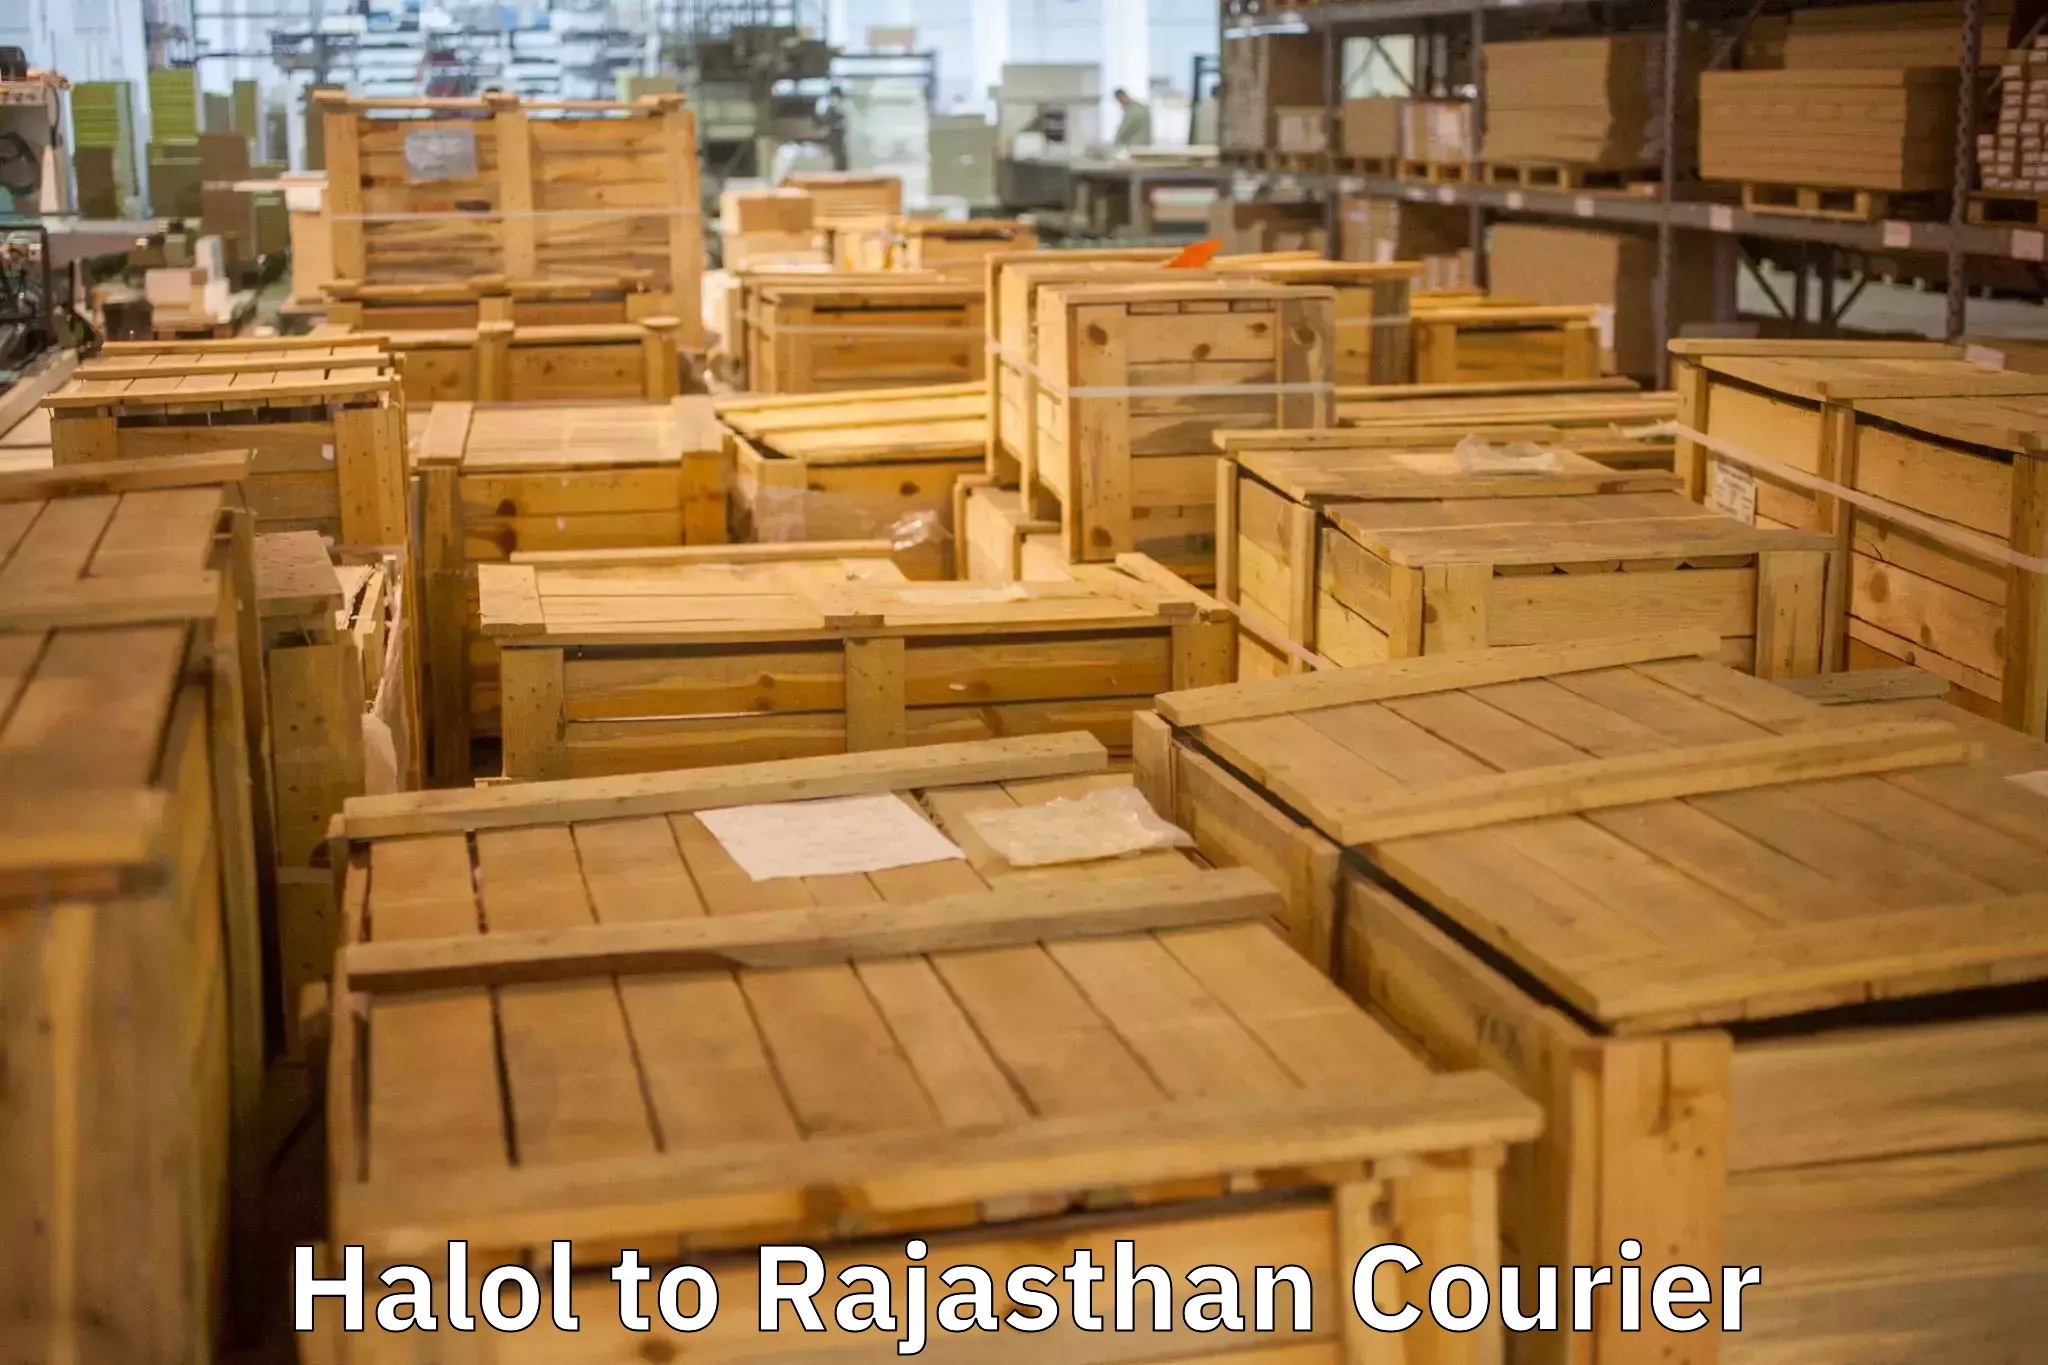 Moving and packing experts Halol to Rajasthan